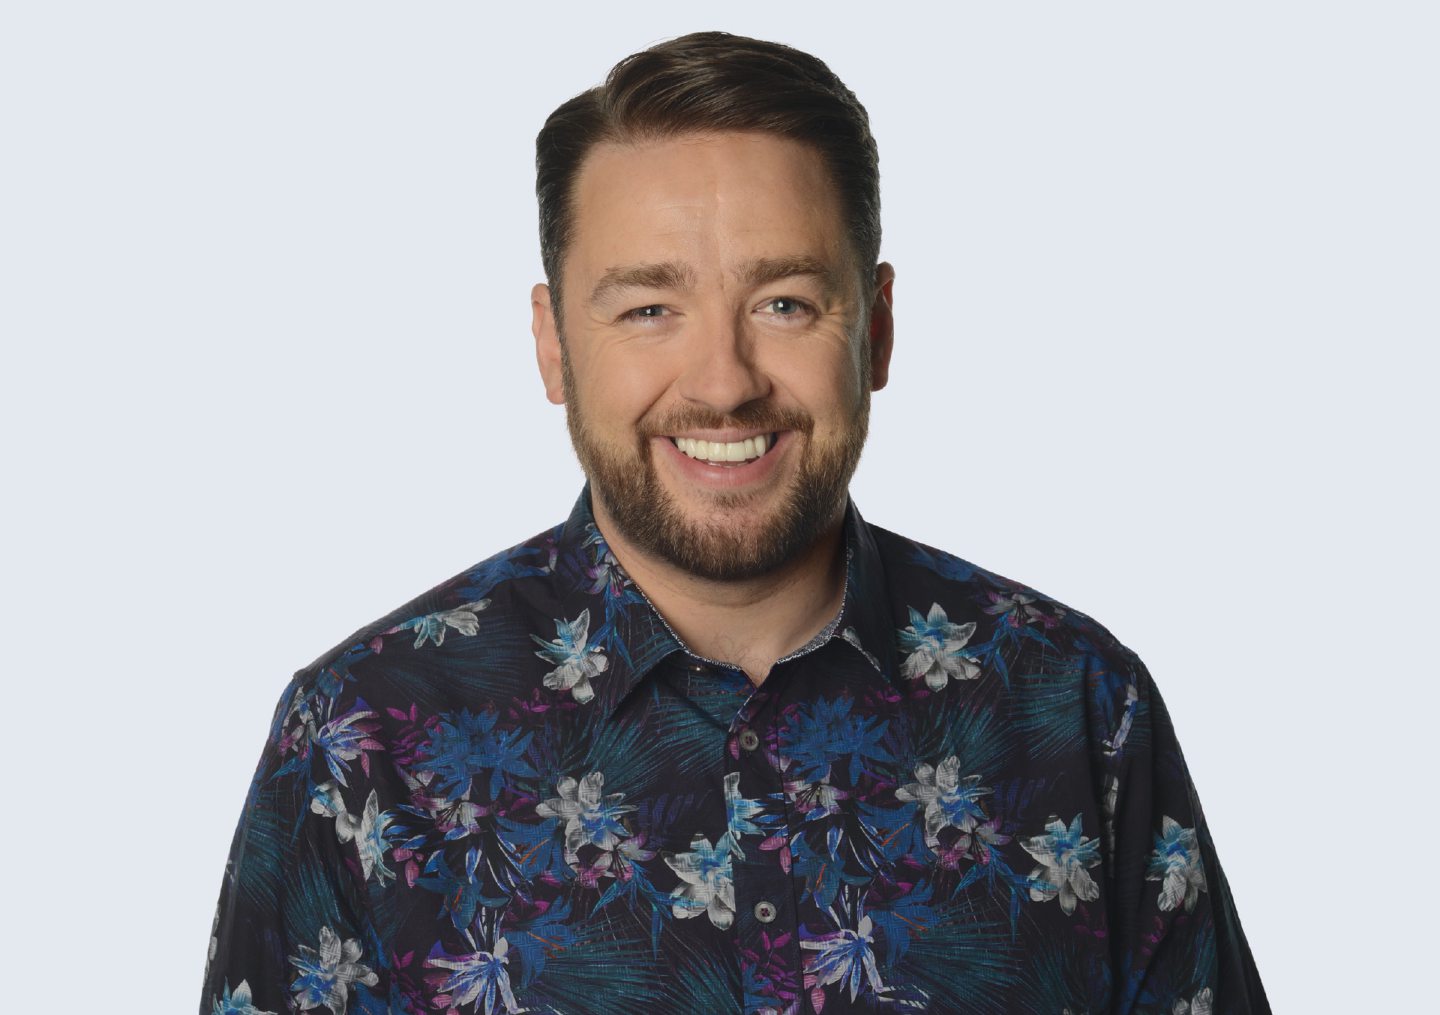 Jason Manford is ready to bring his show to P&J Live